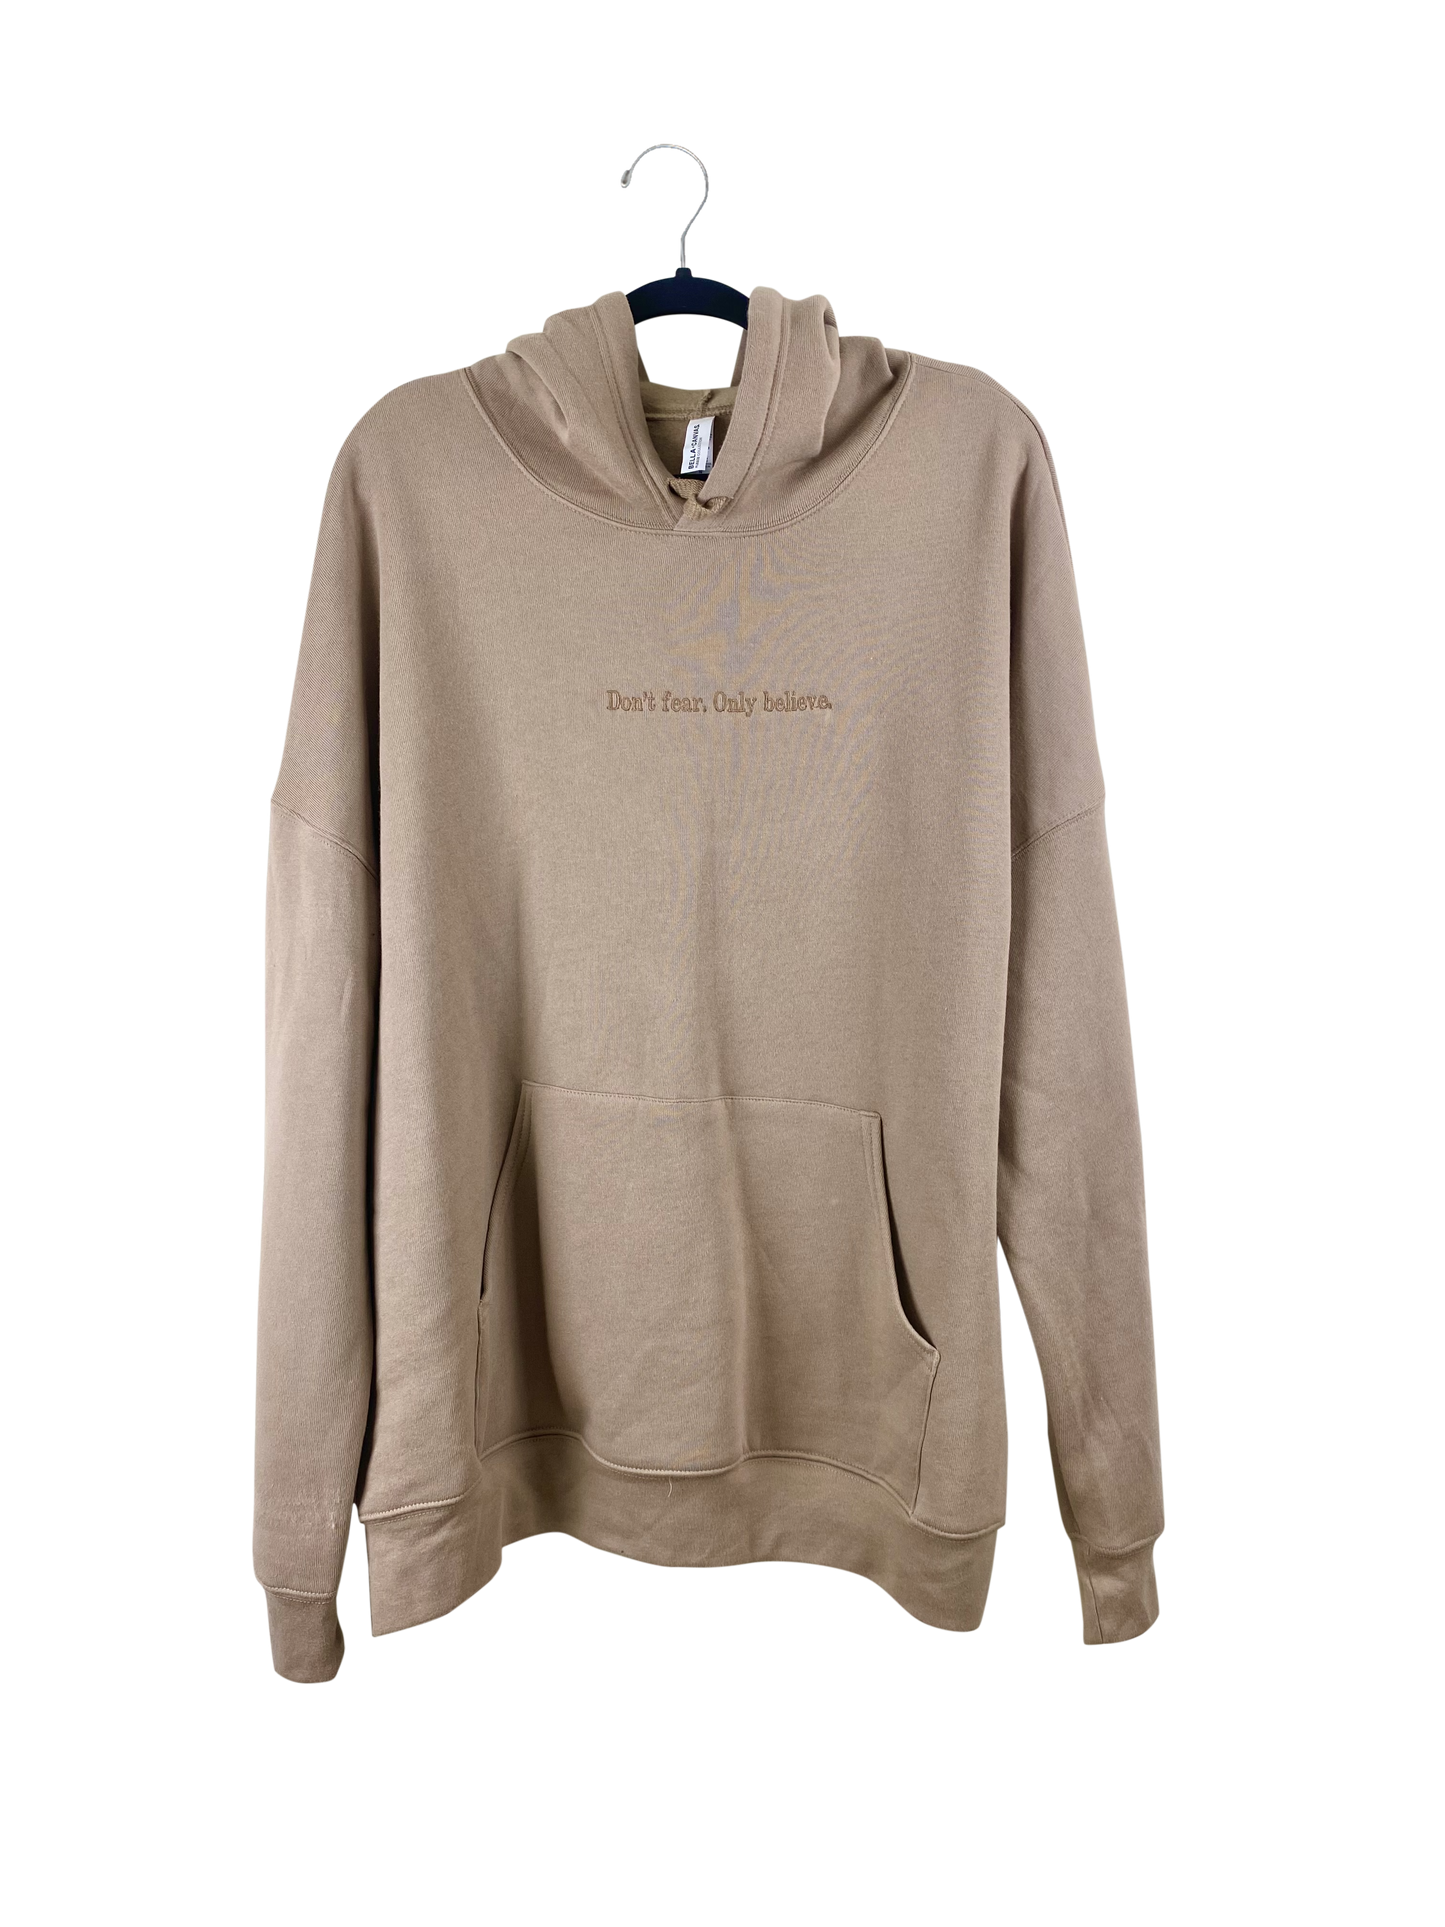 Don't Fear - Tan - Embroidered - Hoodied Sweatshirt